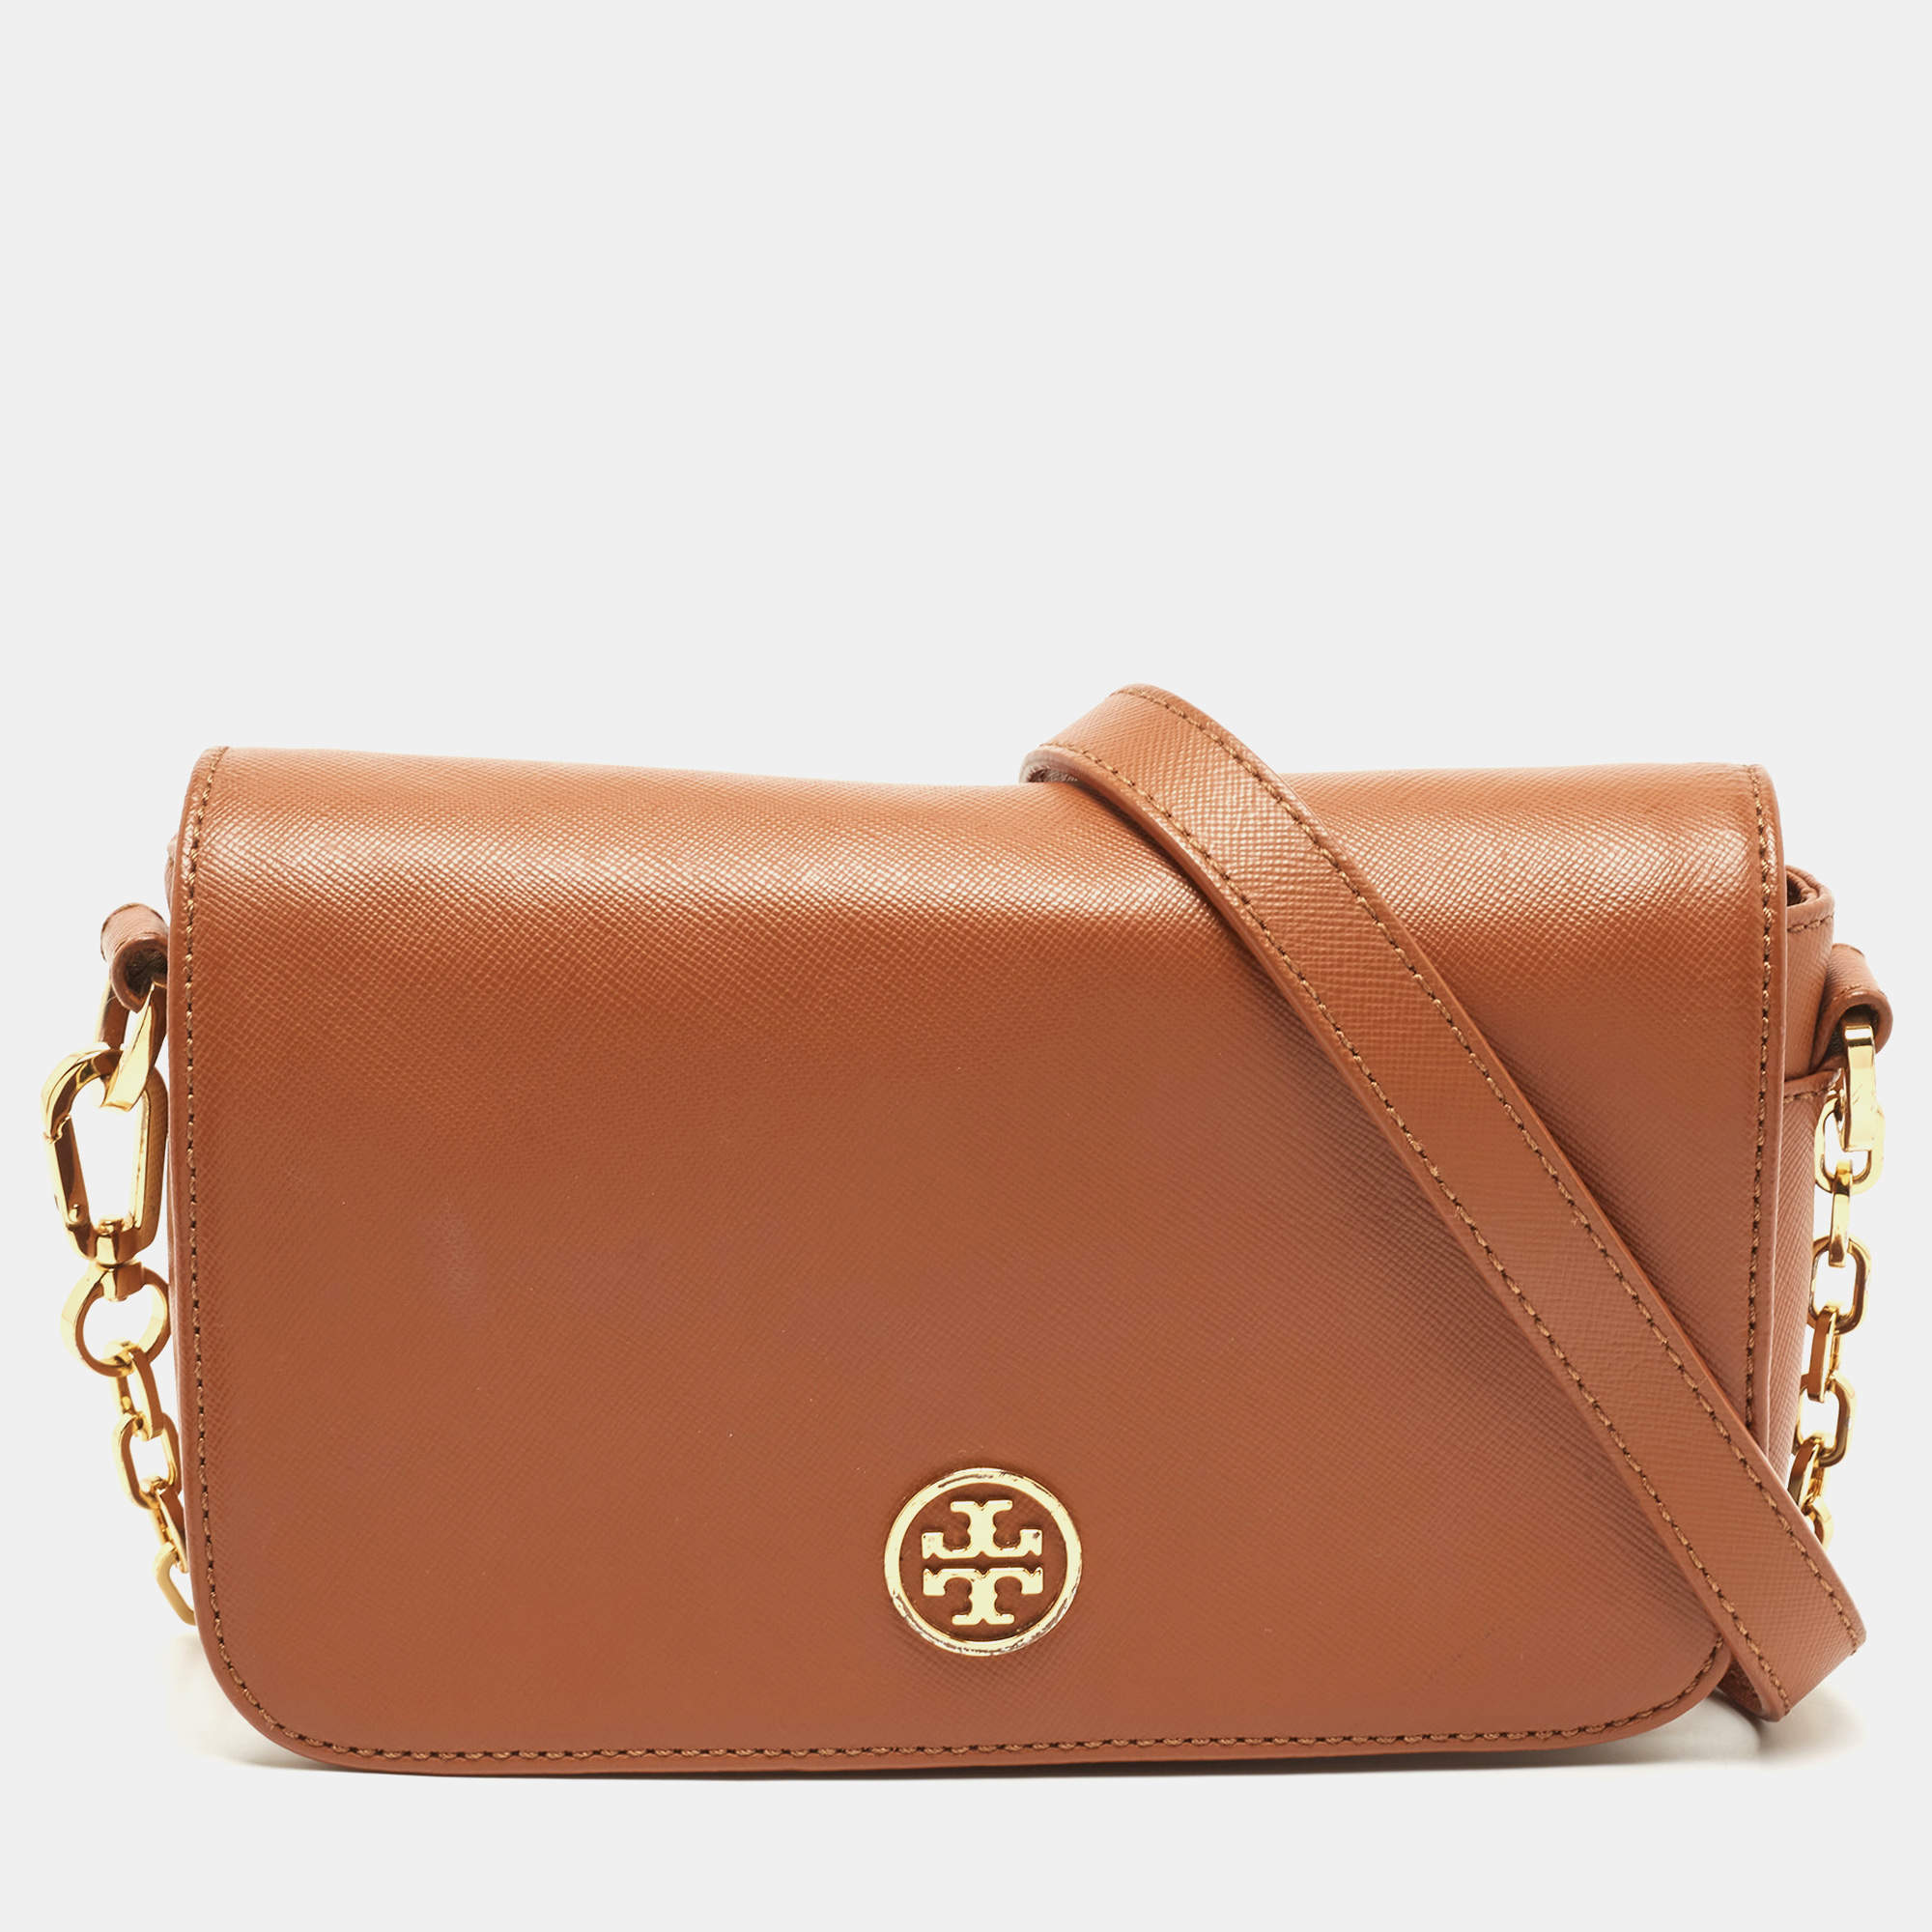 Tory Burch Small Robinson Leather Shoulder Bag - Brown for Women